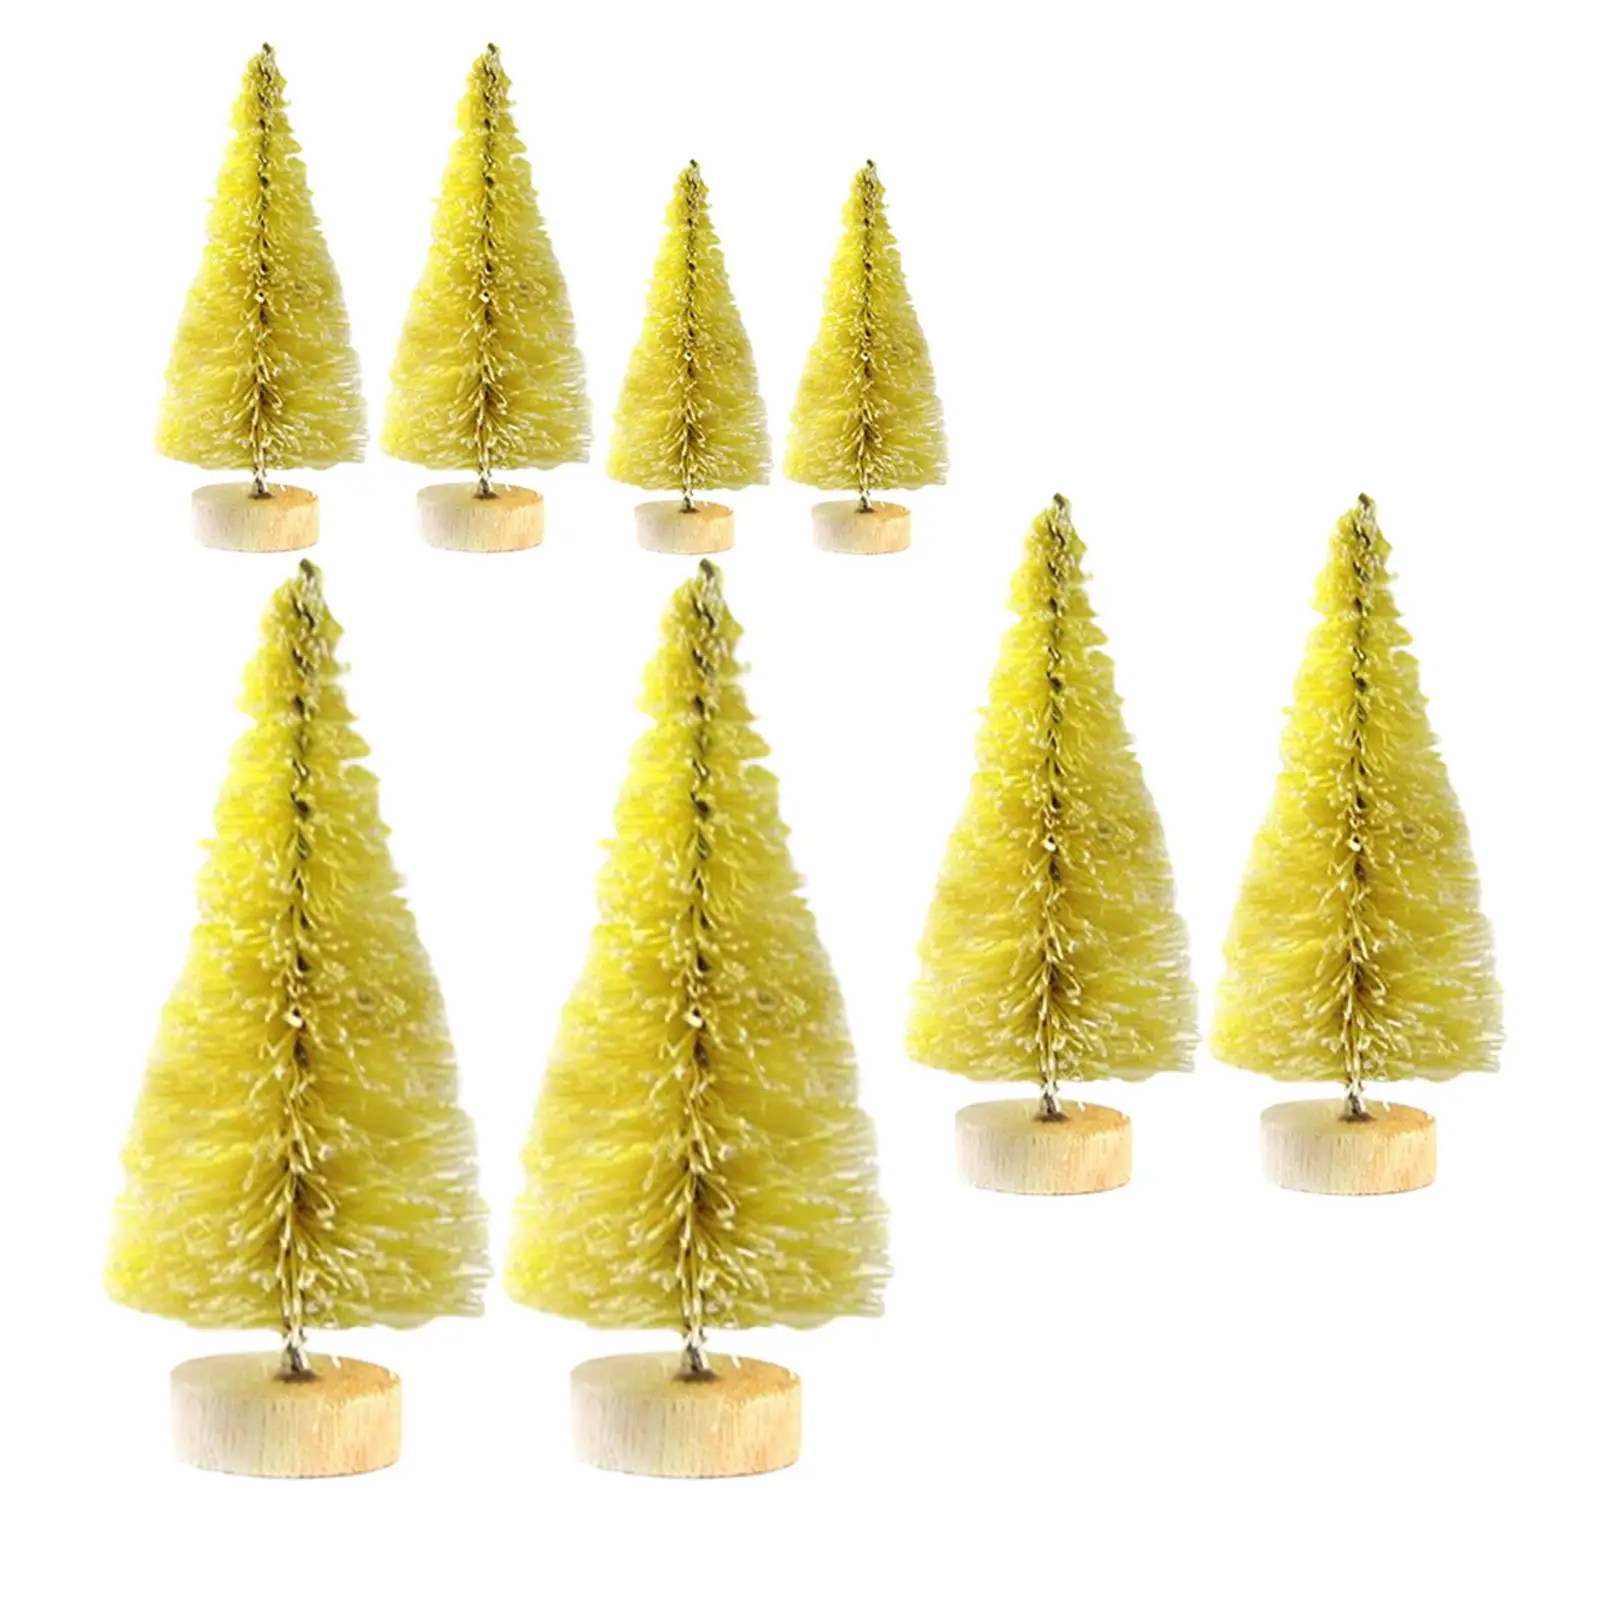 8x Mini Artificial Christmas Brush Trees Ornaments for Holiday